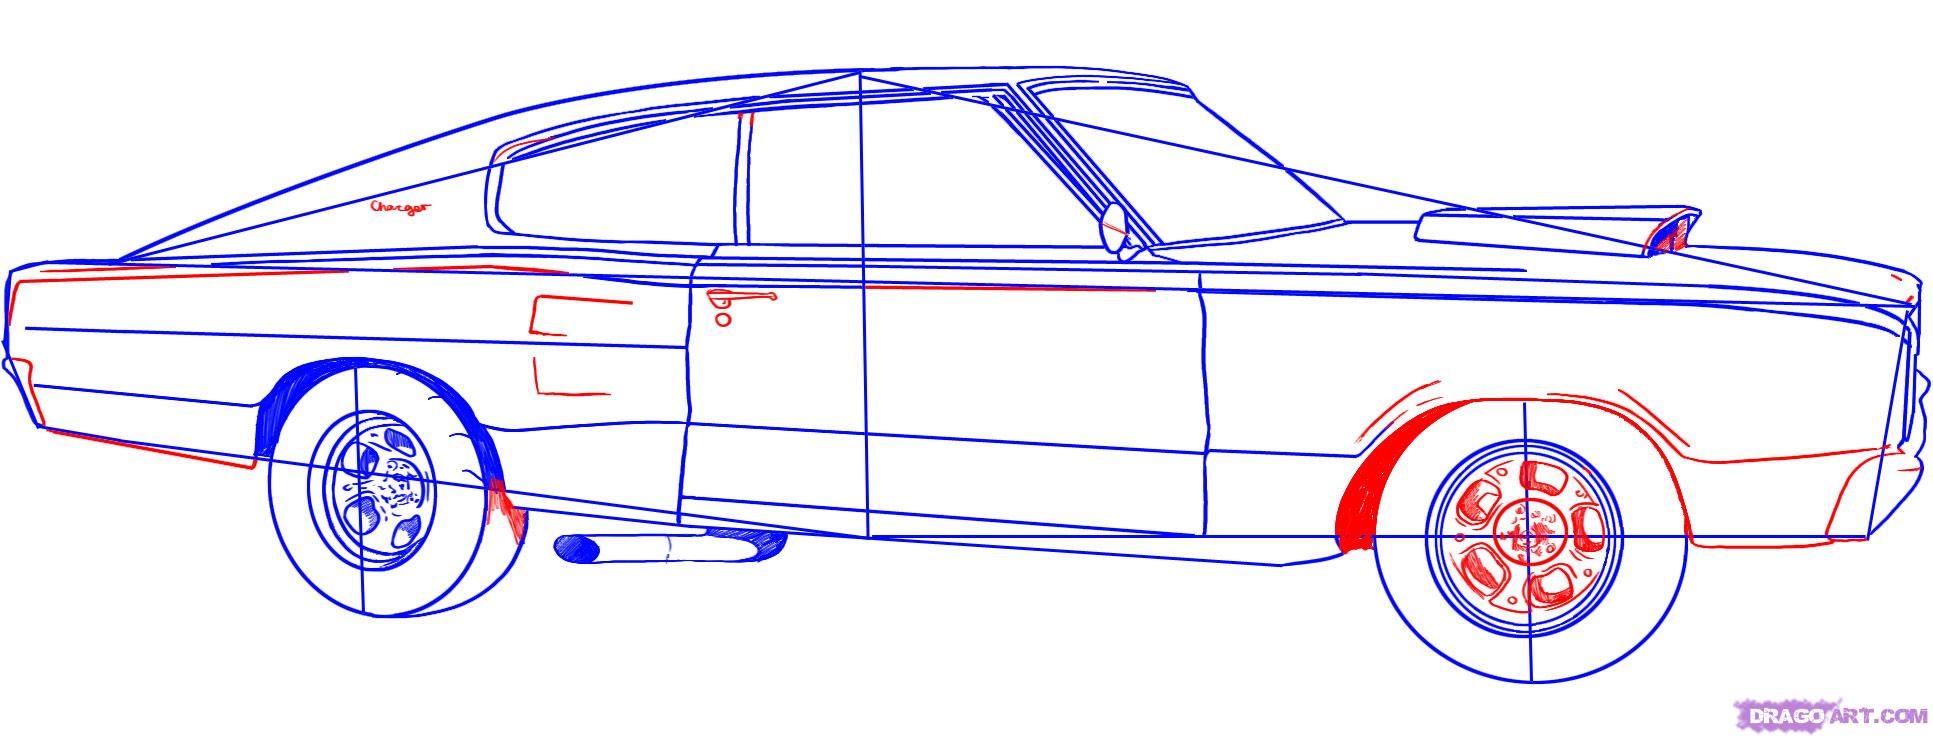 Car Drawings Step By Step | Pictures of Car